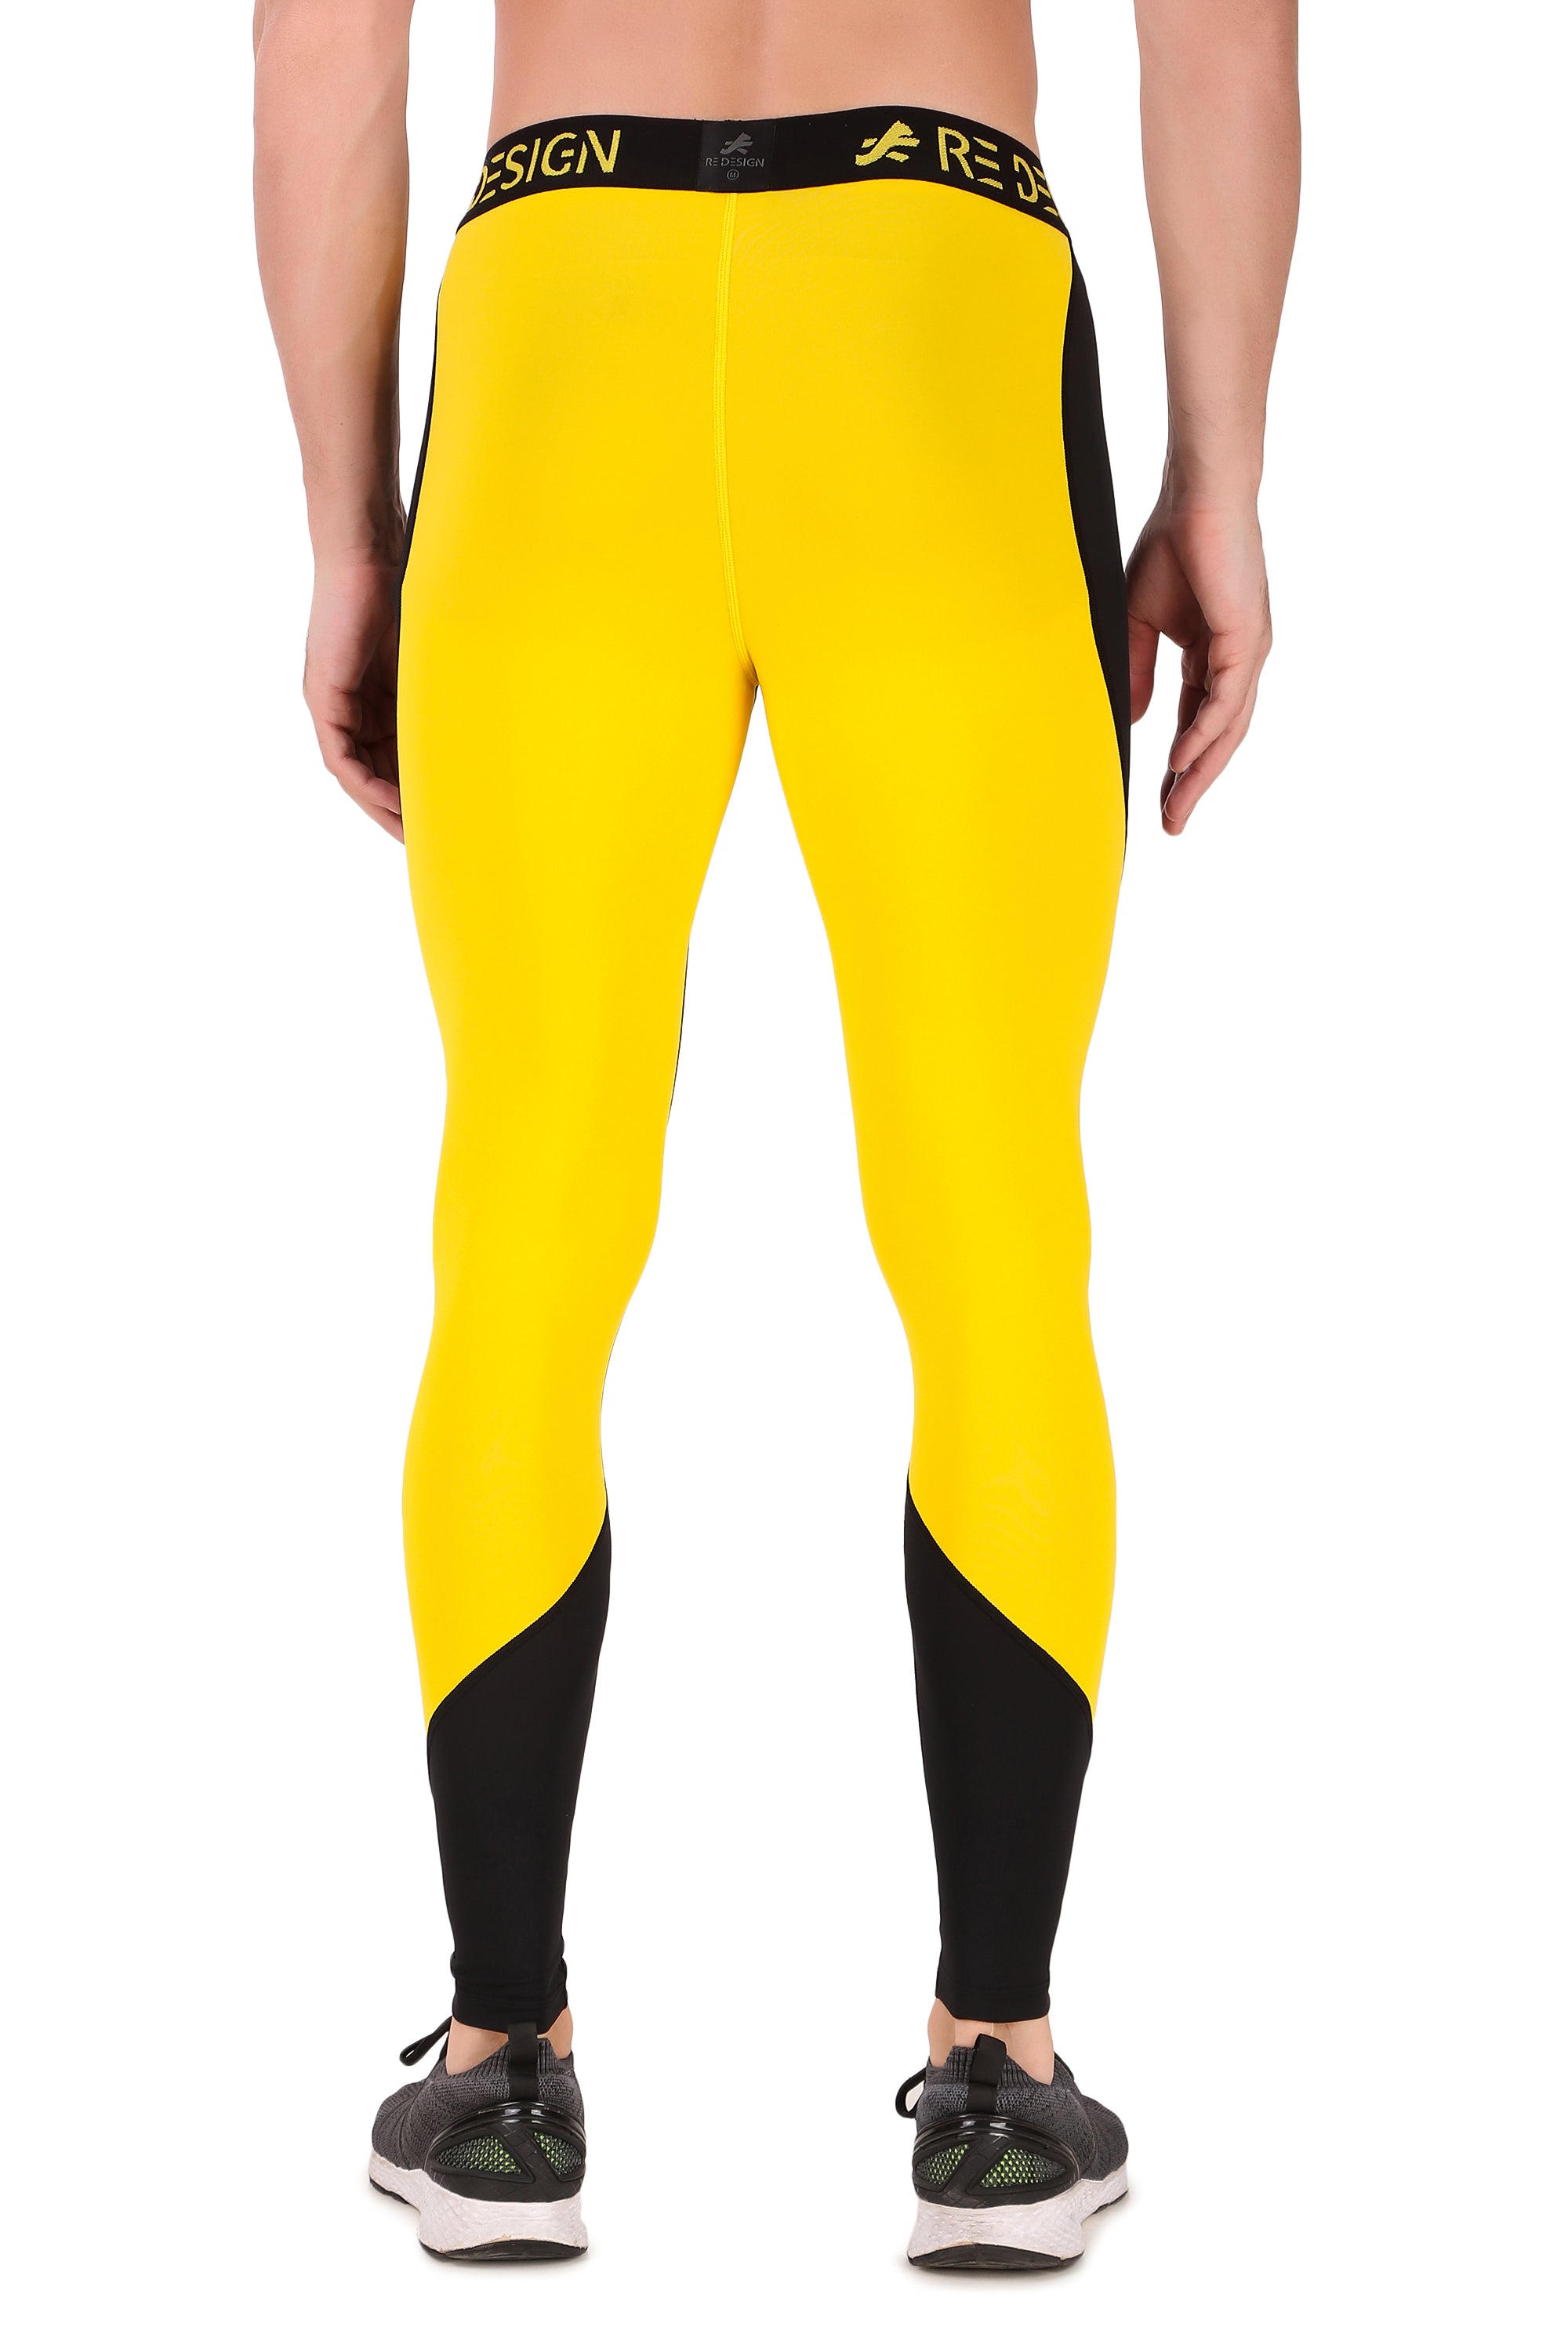 Nylon PB Series Compression Pant and Full Tights For Men (Black/Yellow)